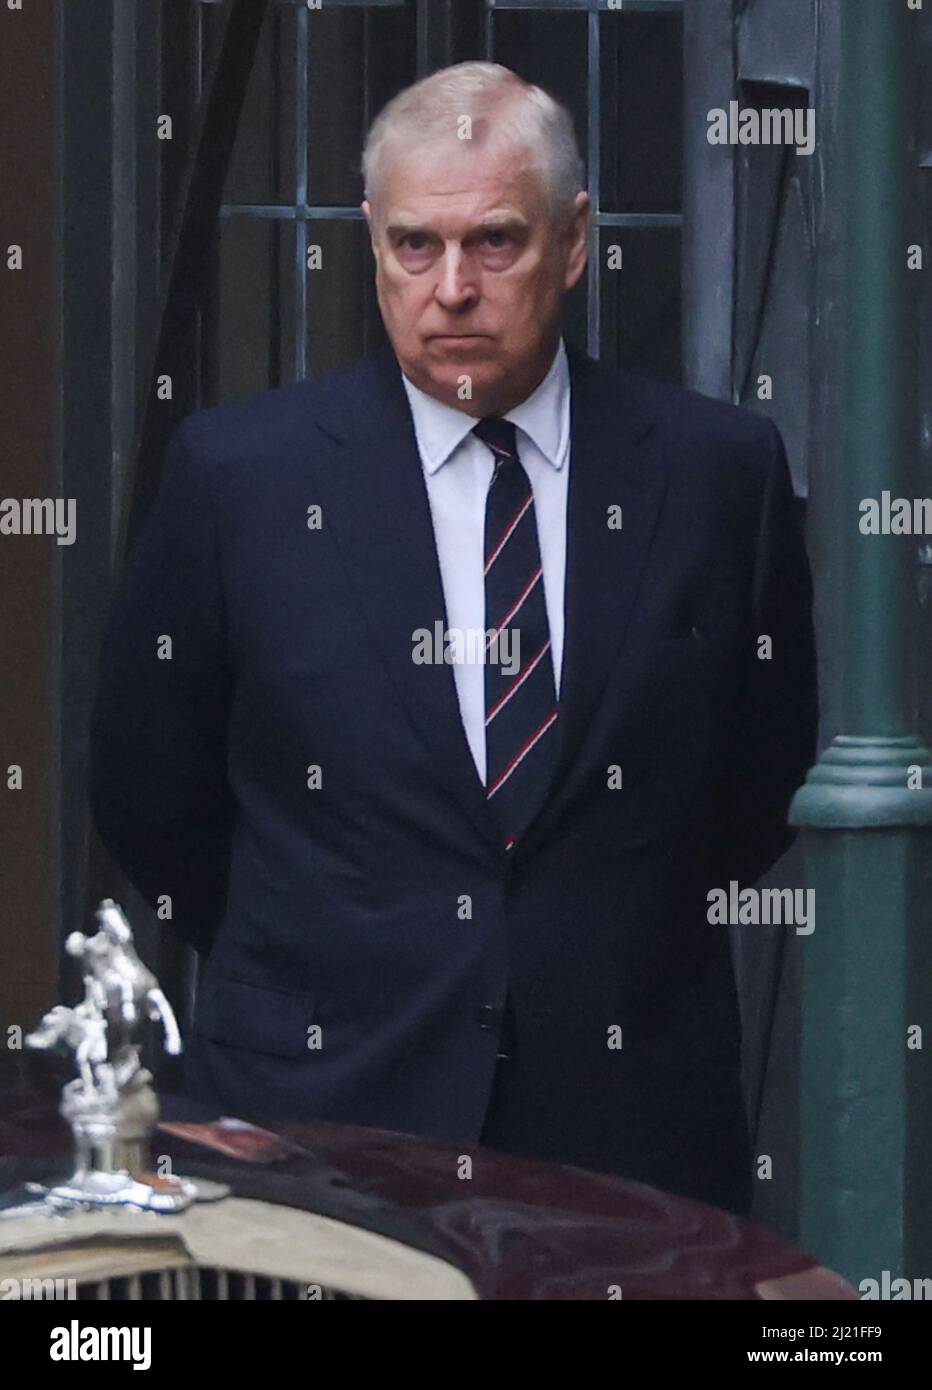 Prince Andrew, Duke of York, stands outside the Westminster Abbey after a service of thanksgiving for late Prince Philip, Duke of Edinburgh, in London, Britain, March 29, 2022. REUTERS/Tom Nicholson Stock Photo